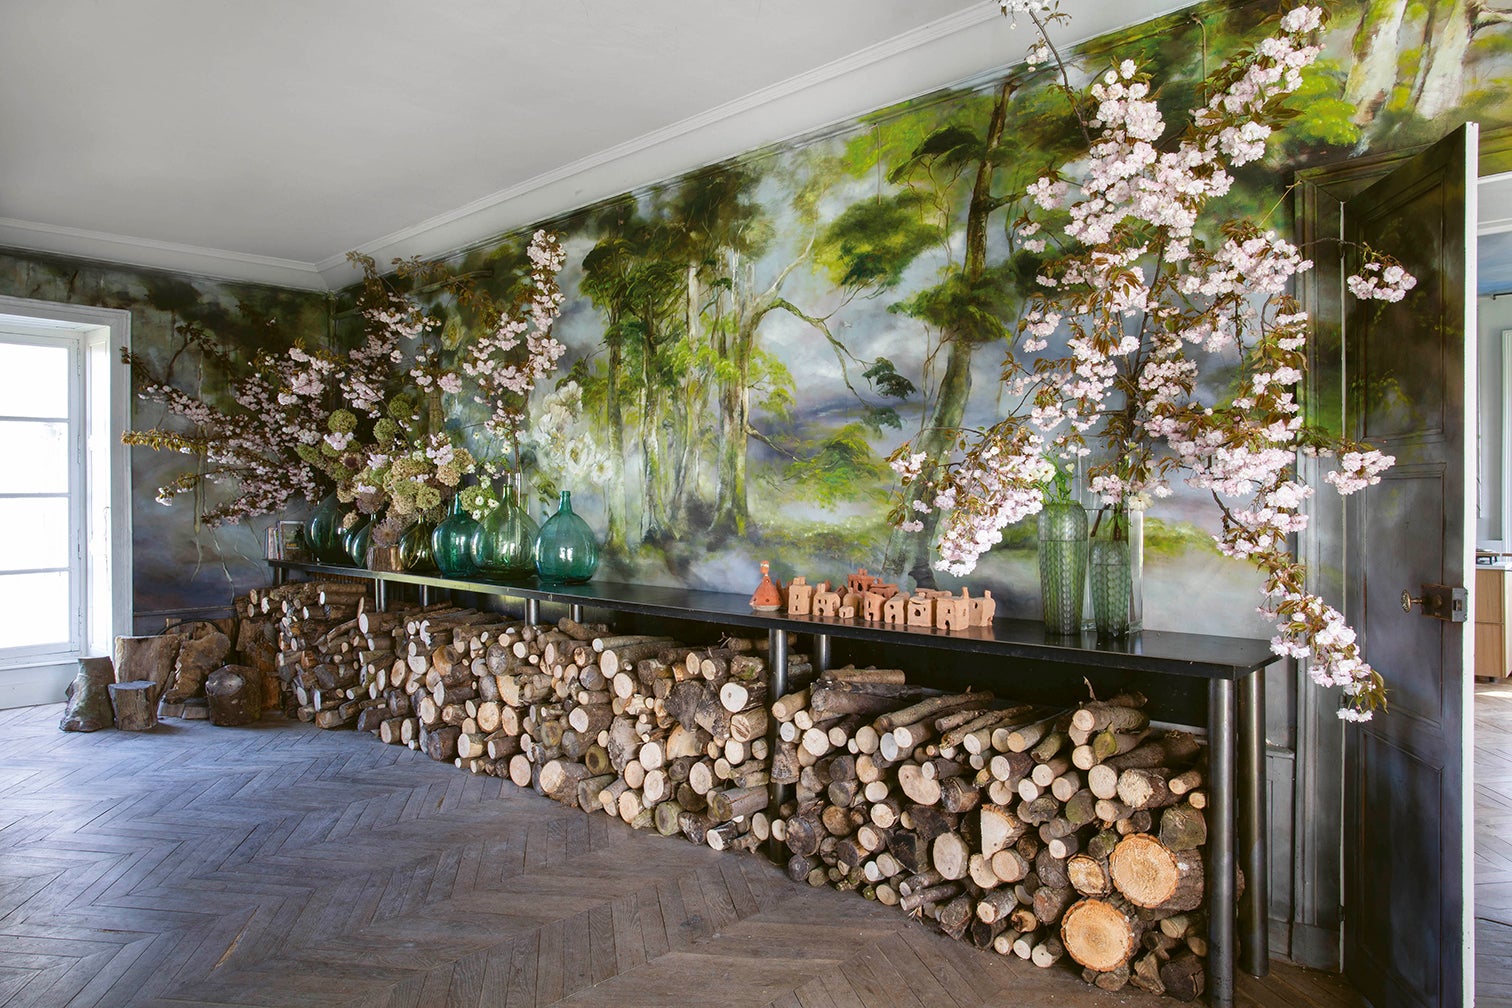 Room with painted mural and chopped wood